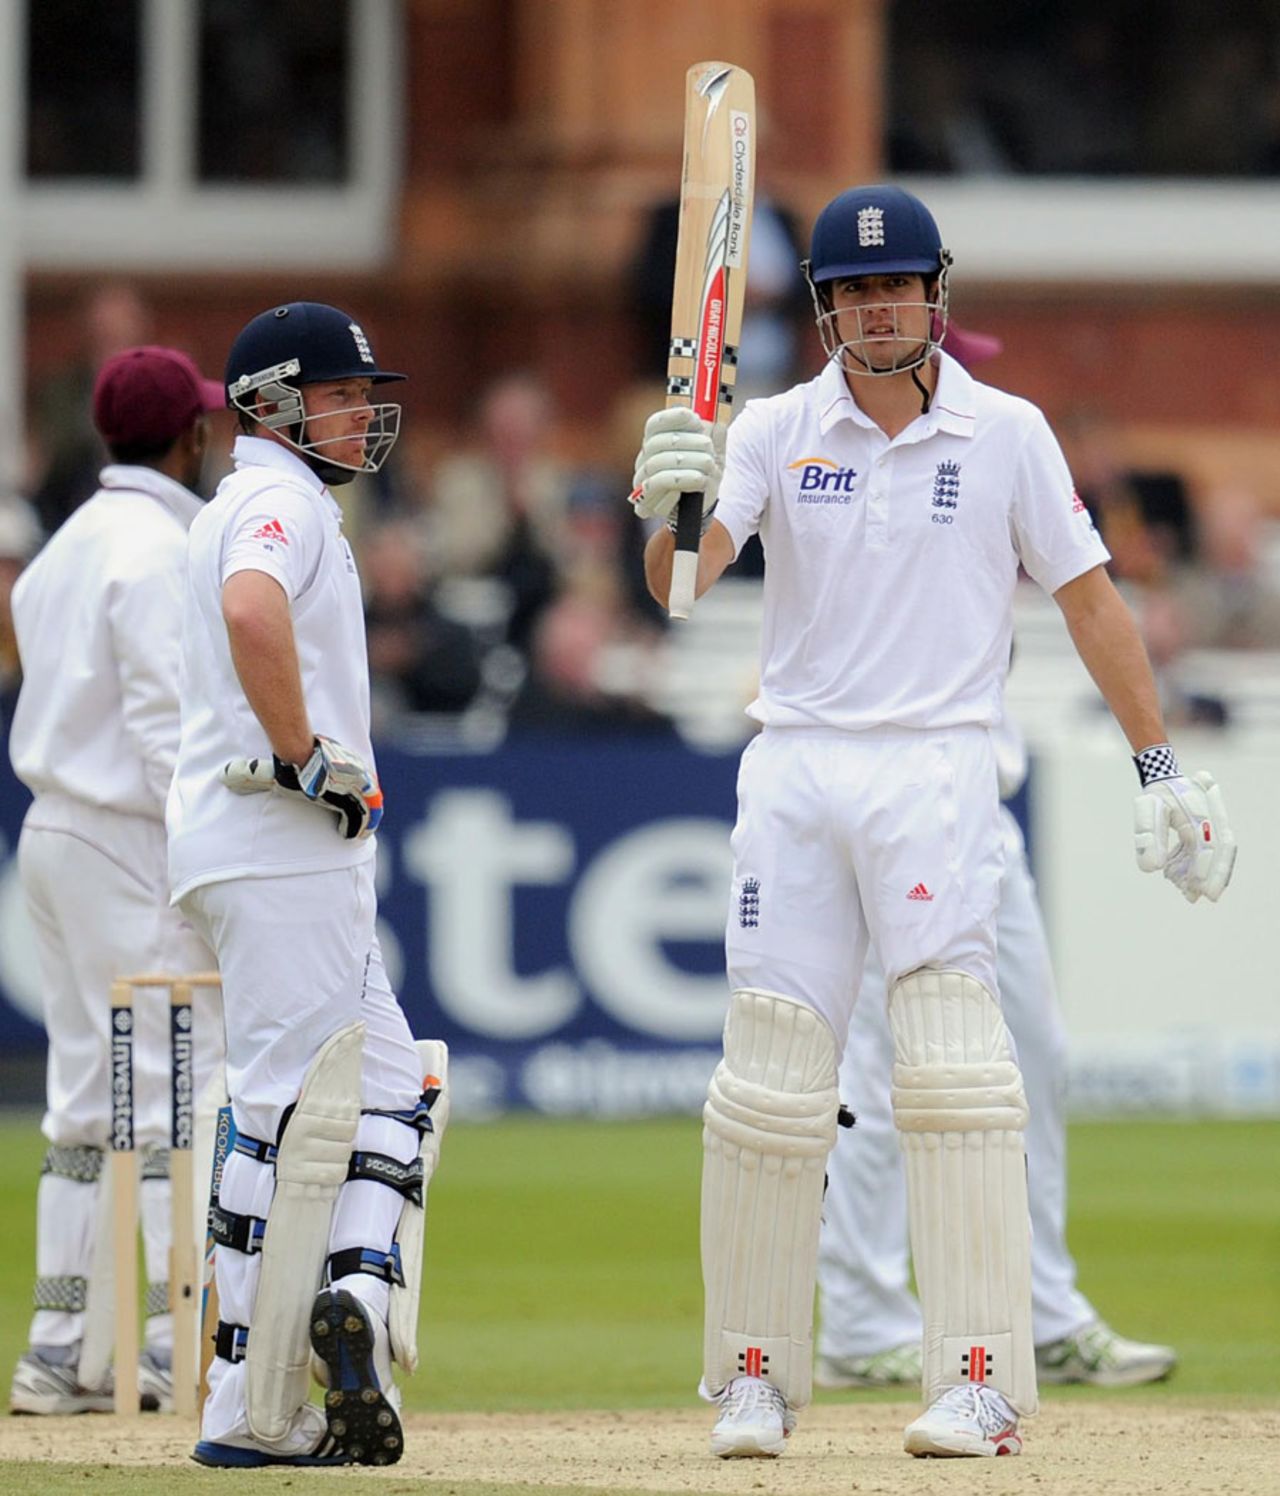 Alastair Cook made a composed half century, England v West Indies, 1st Test, Lord's, 5th day, May 21, 2012